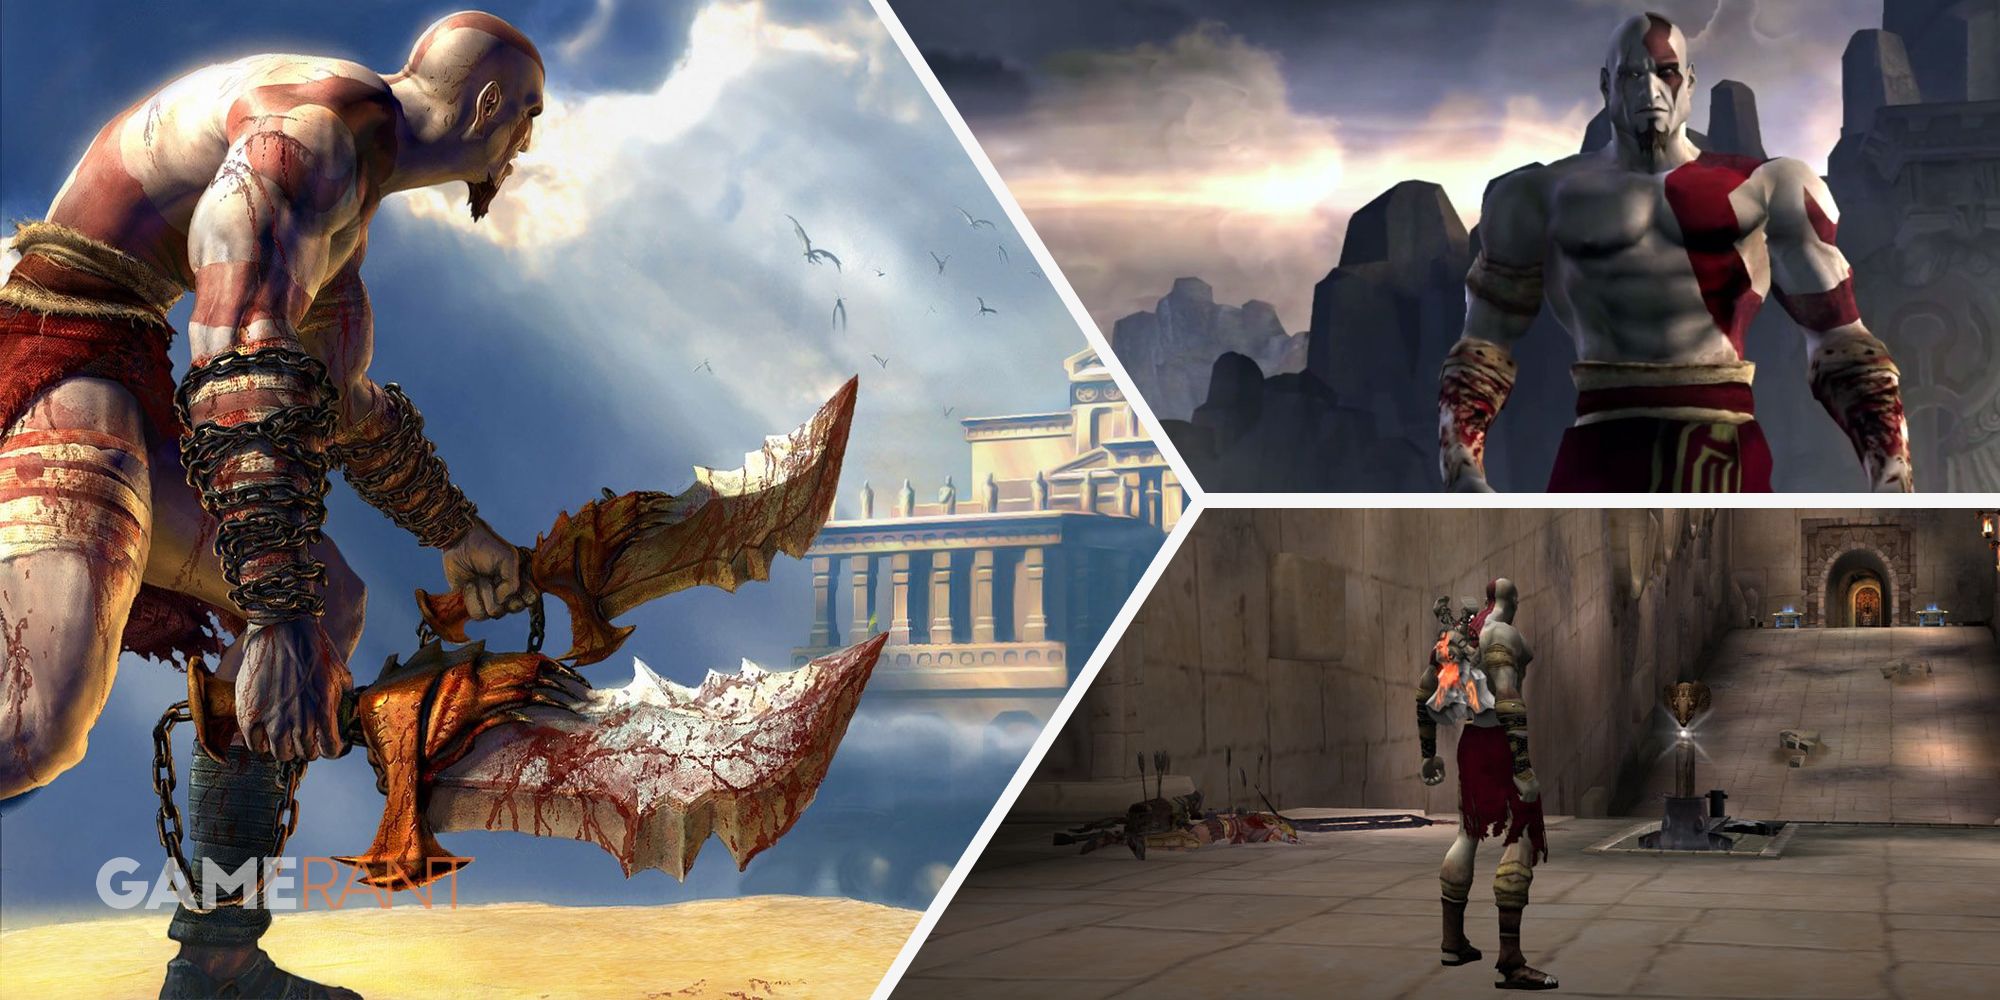 God of War Kratos with dual wield swords on left, Kratos posing on top right, Kratos in God of War screenshot on bottom right